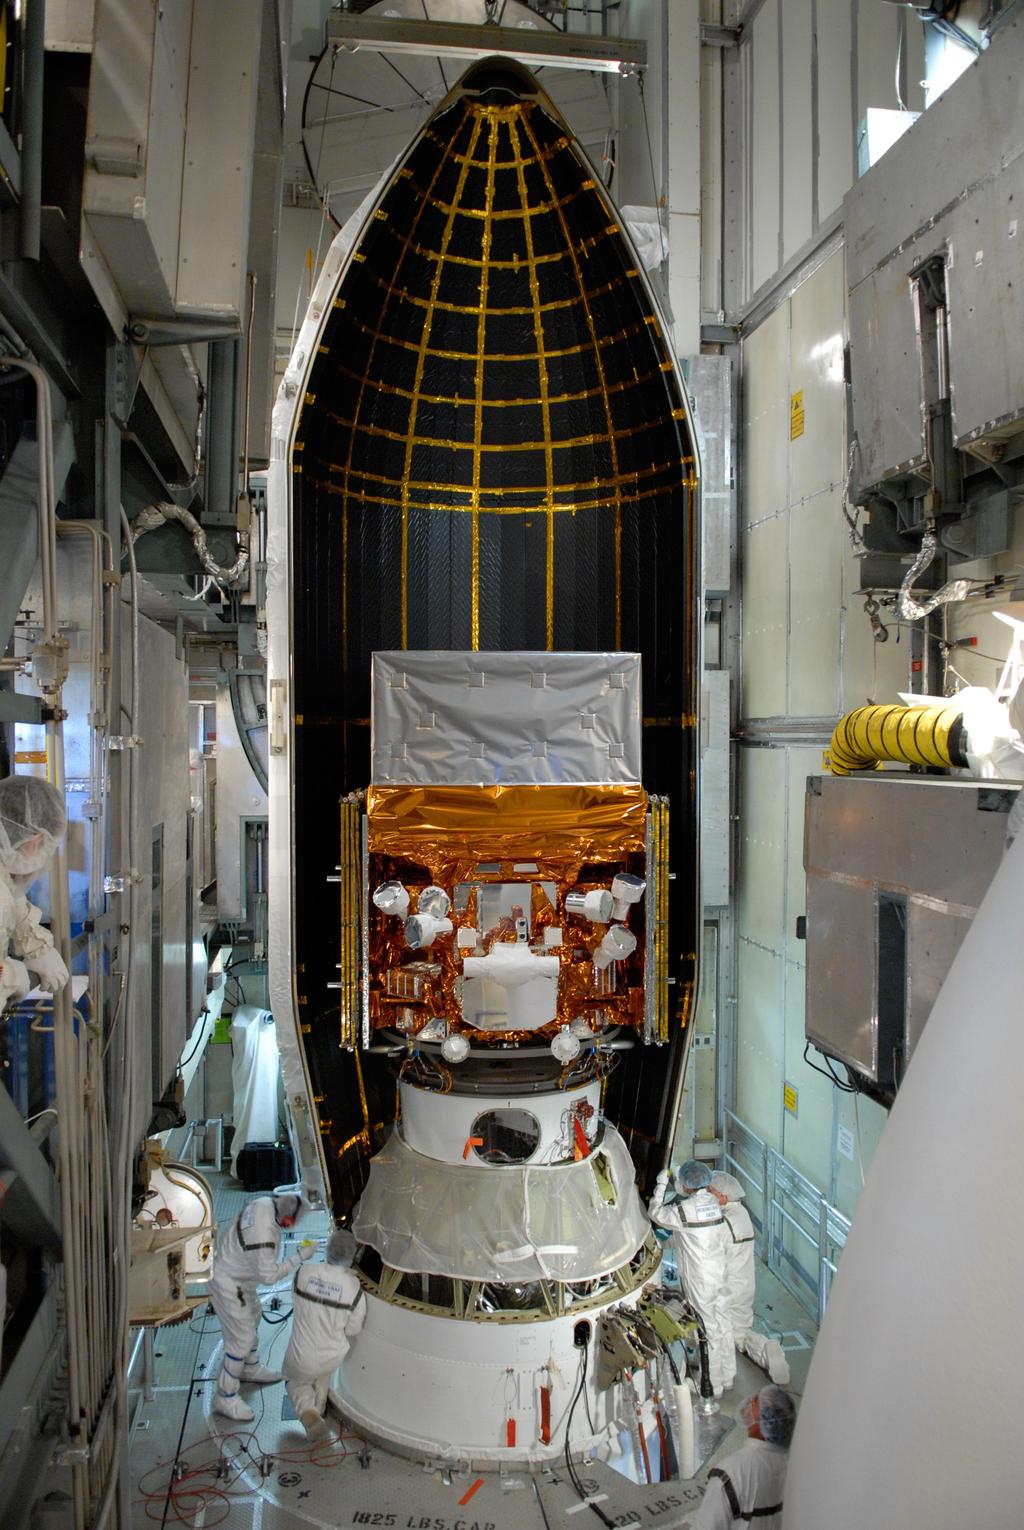 The Fermi LAT Fermi was launched on June 11, 2008. The primary instrument is the LAT: 100 MeV (or lower) to 300 GeV (and higher).